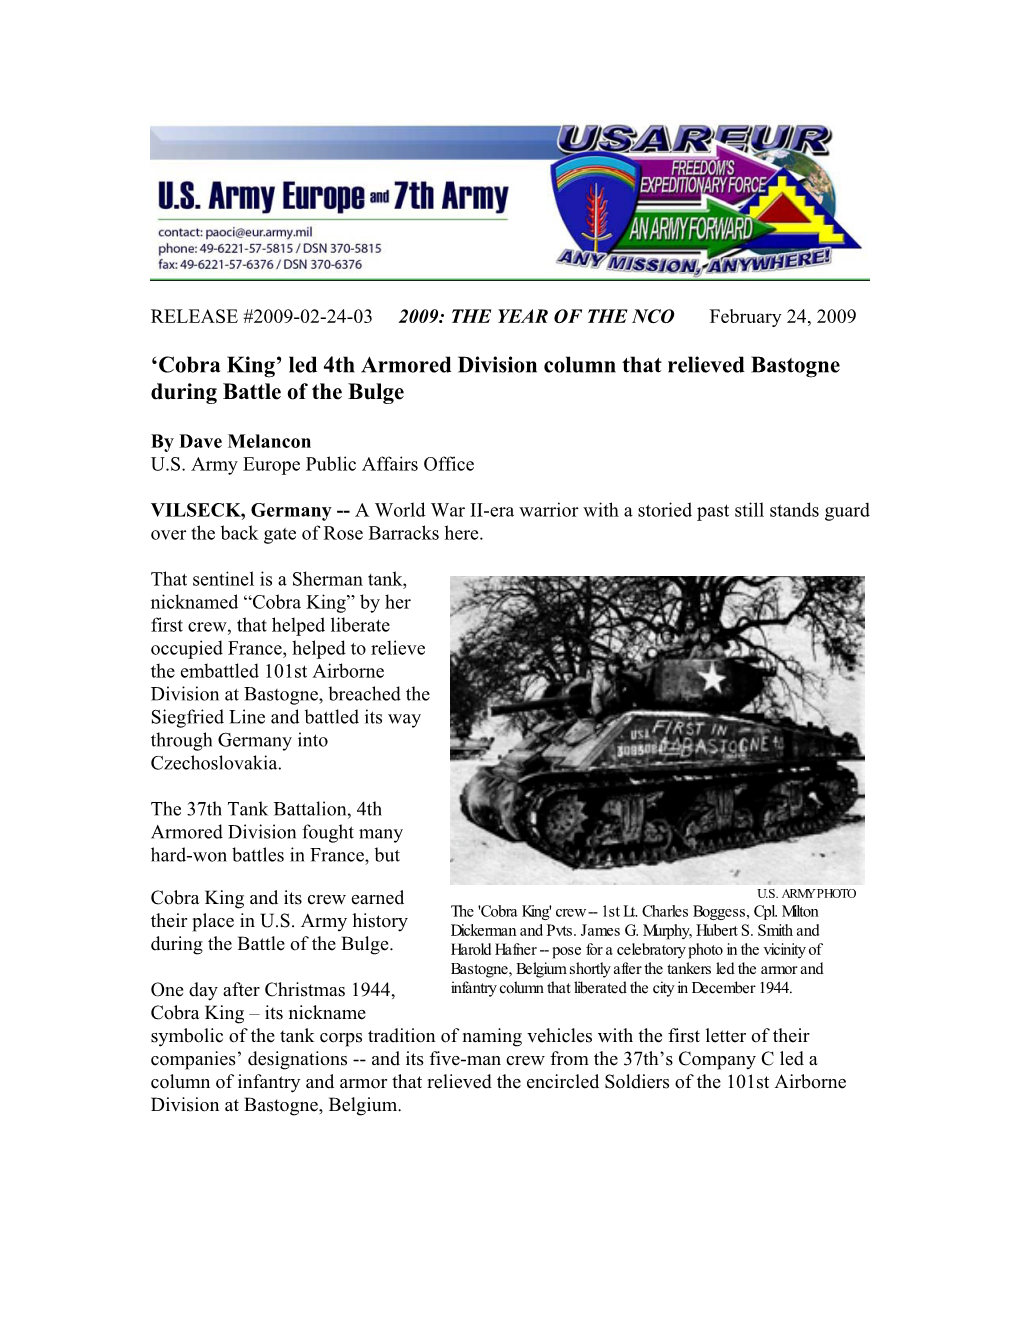 'Cobra King' Led 4Th Armored Division Column That Relieved Bastogne